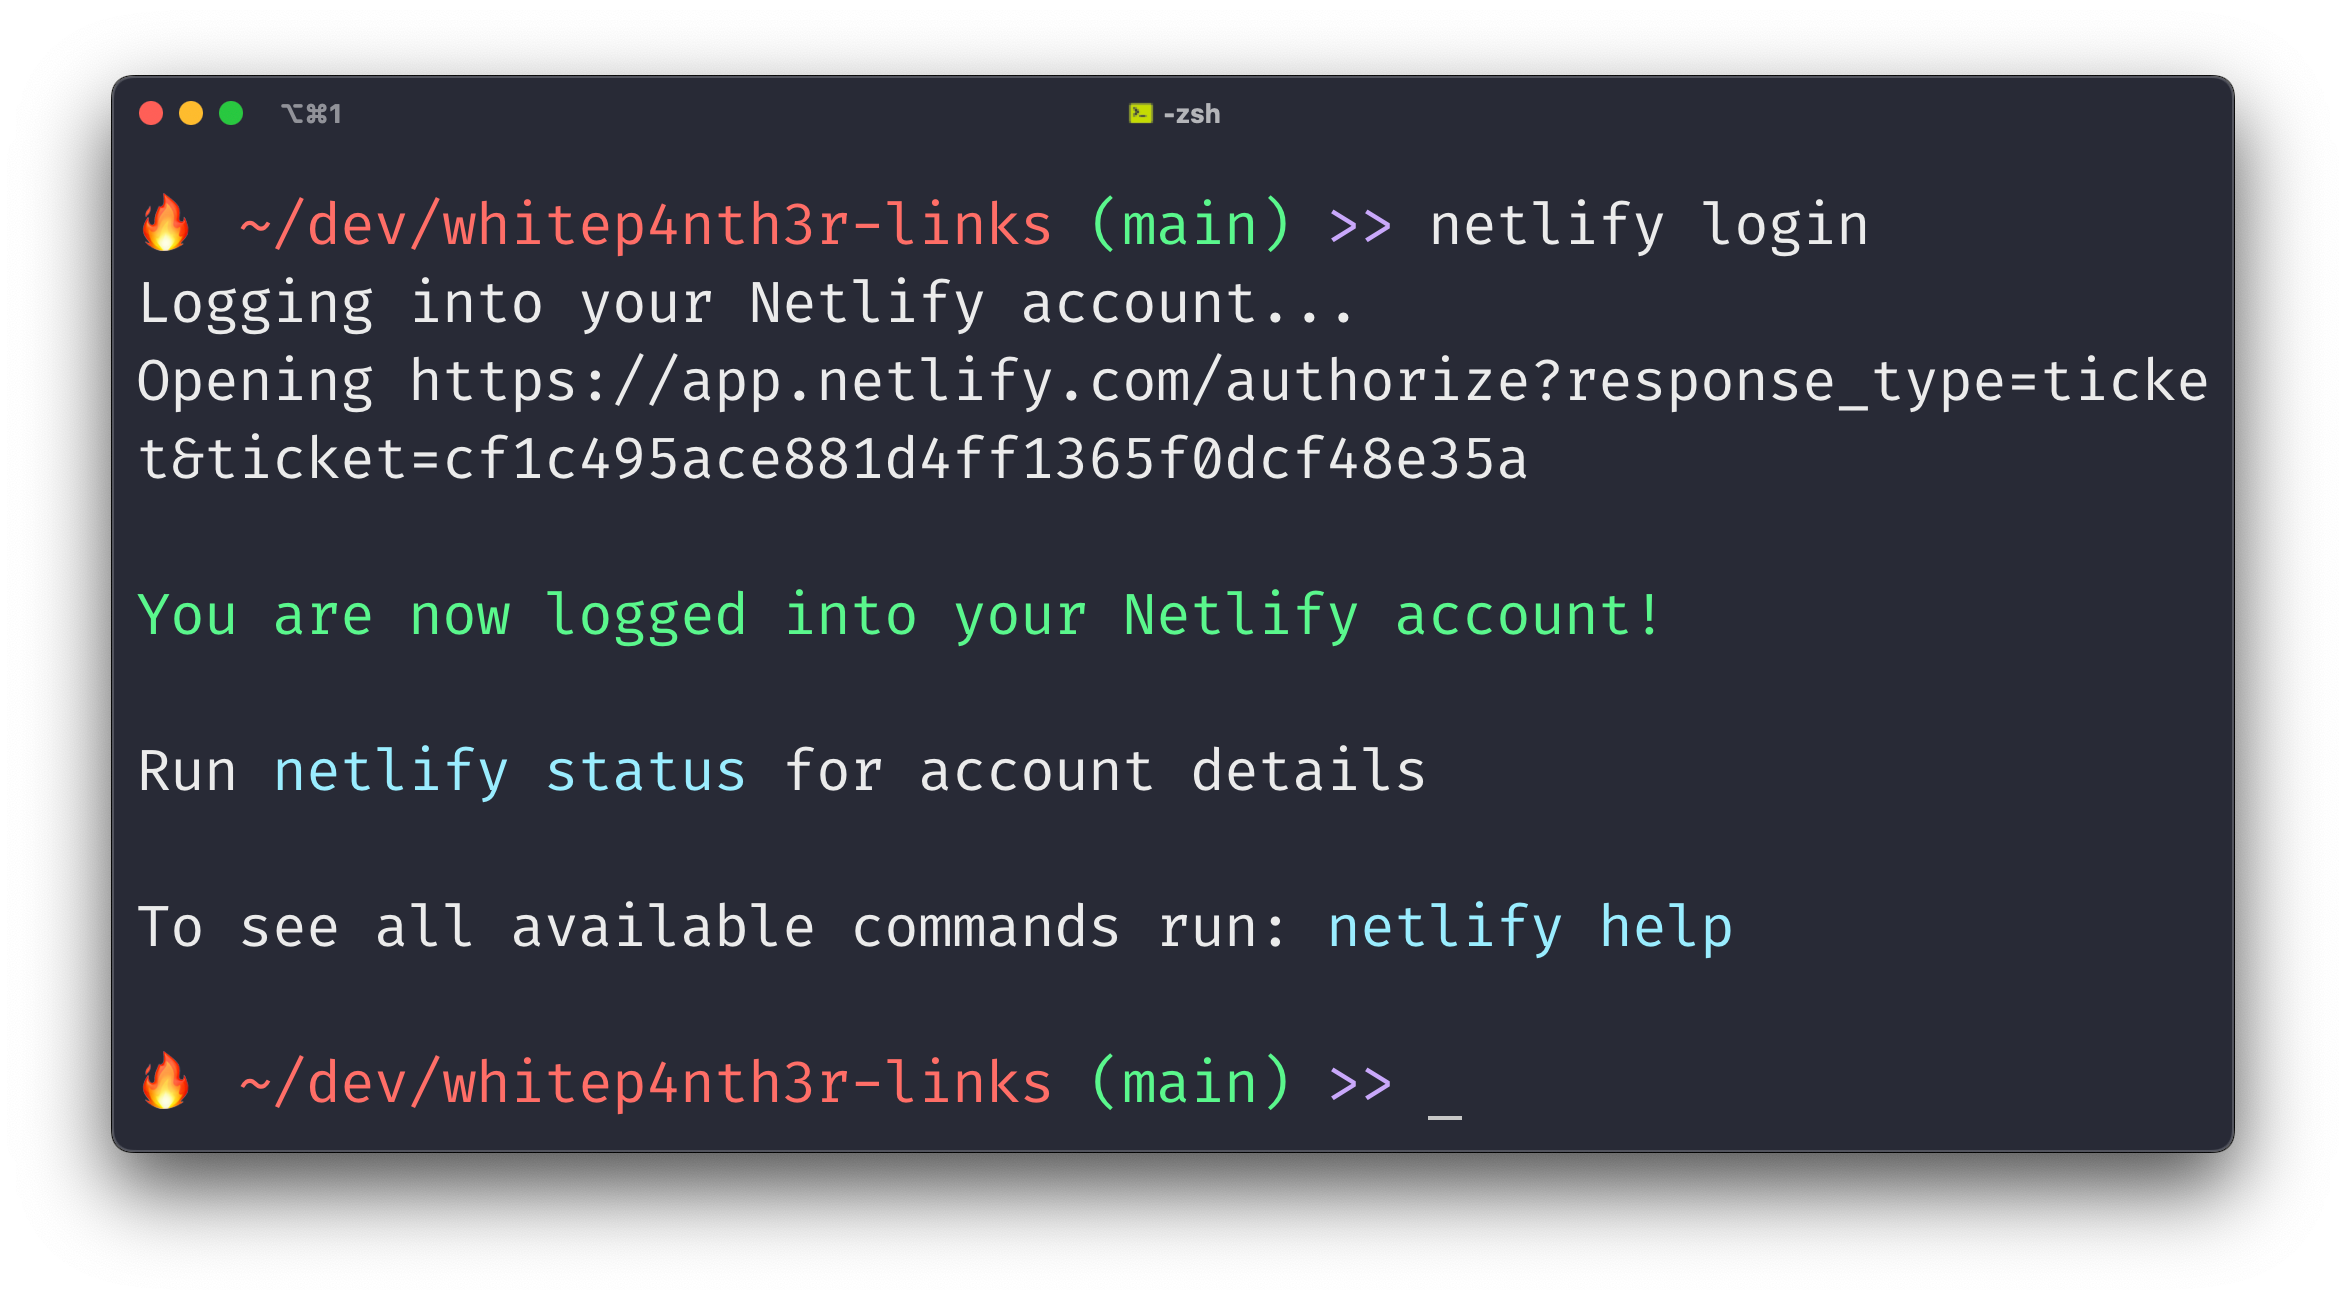 Netlify login has logged me in to my Netlify account on the CLI